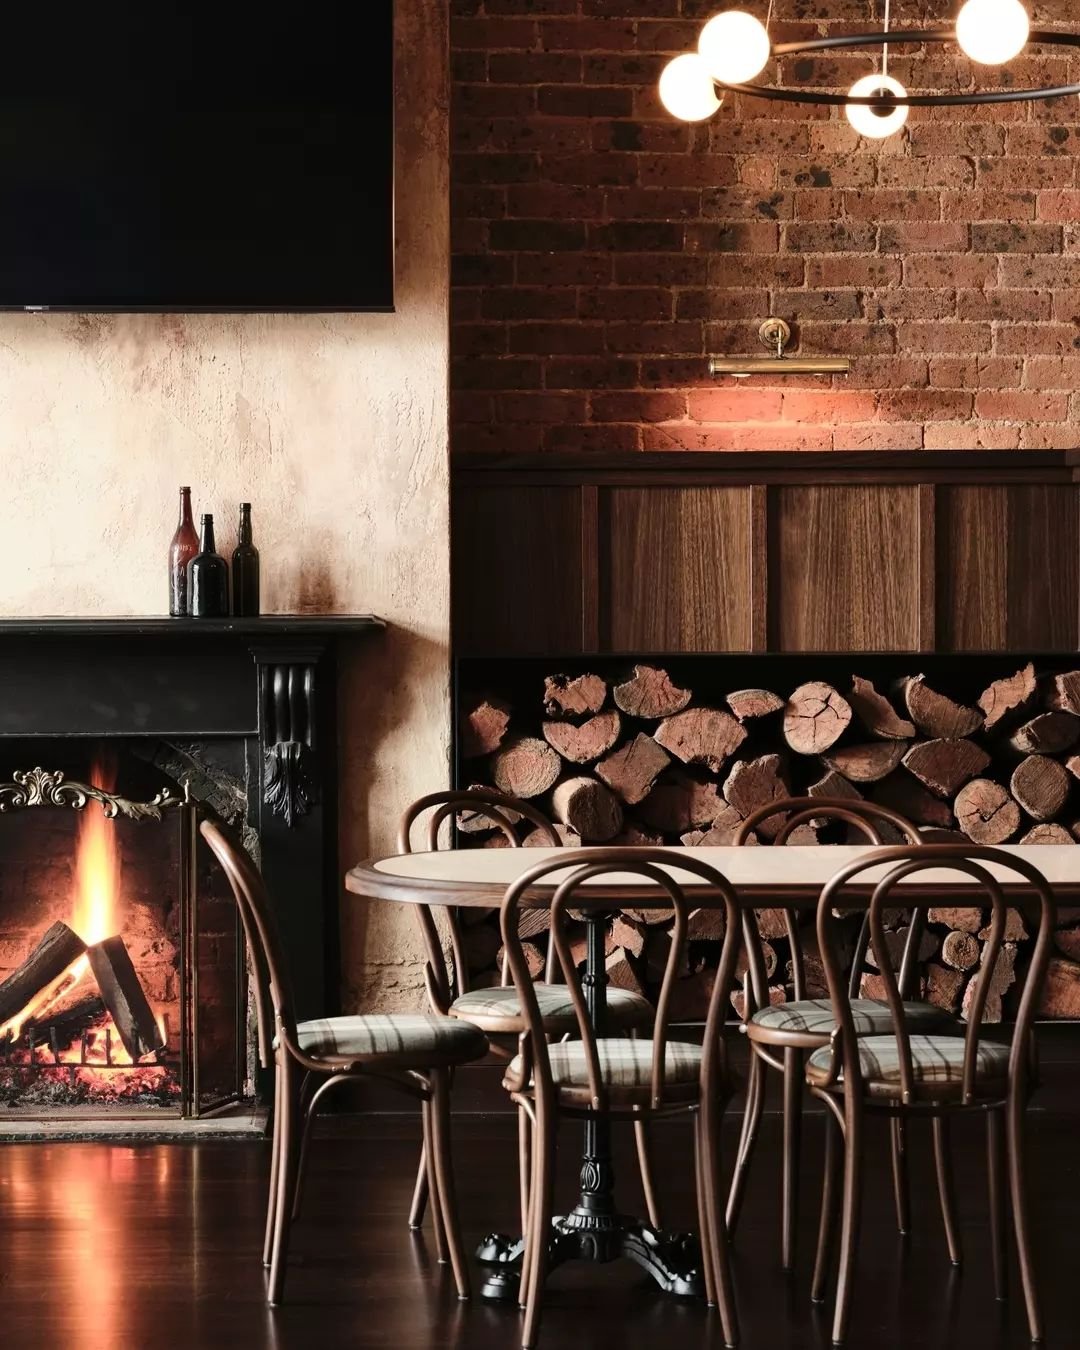 It's been a little chilly lately. Swing by after work and enjoy a glass of wine next to our cosy fire.